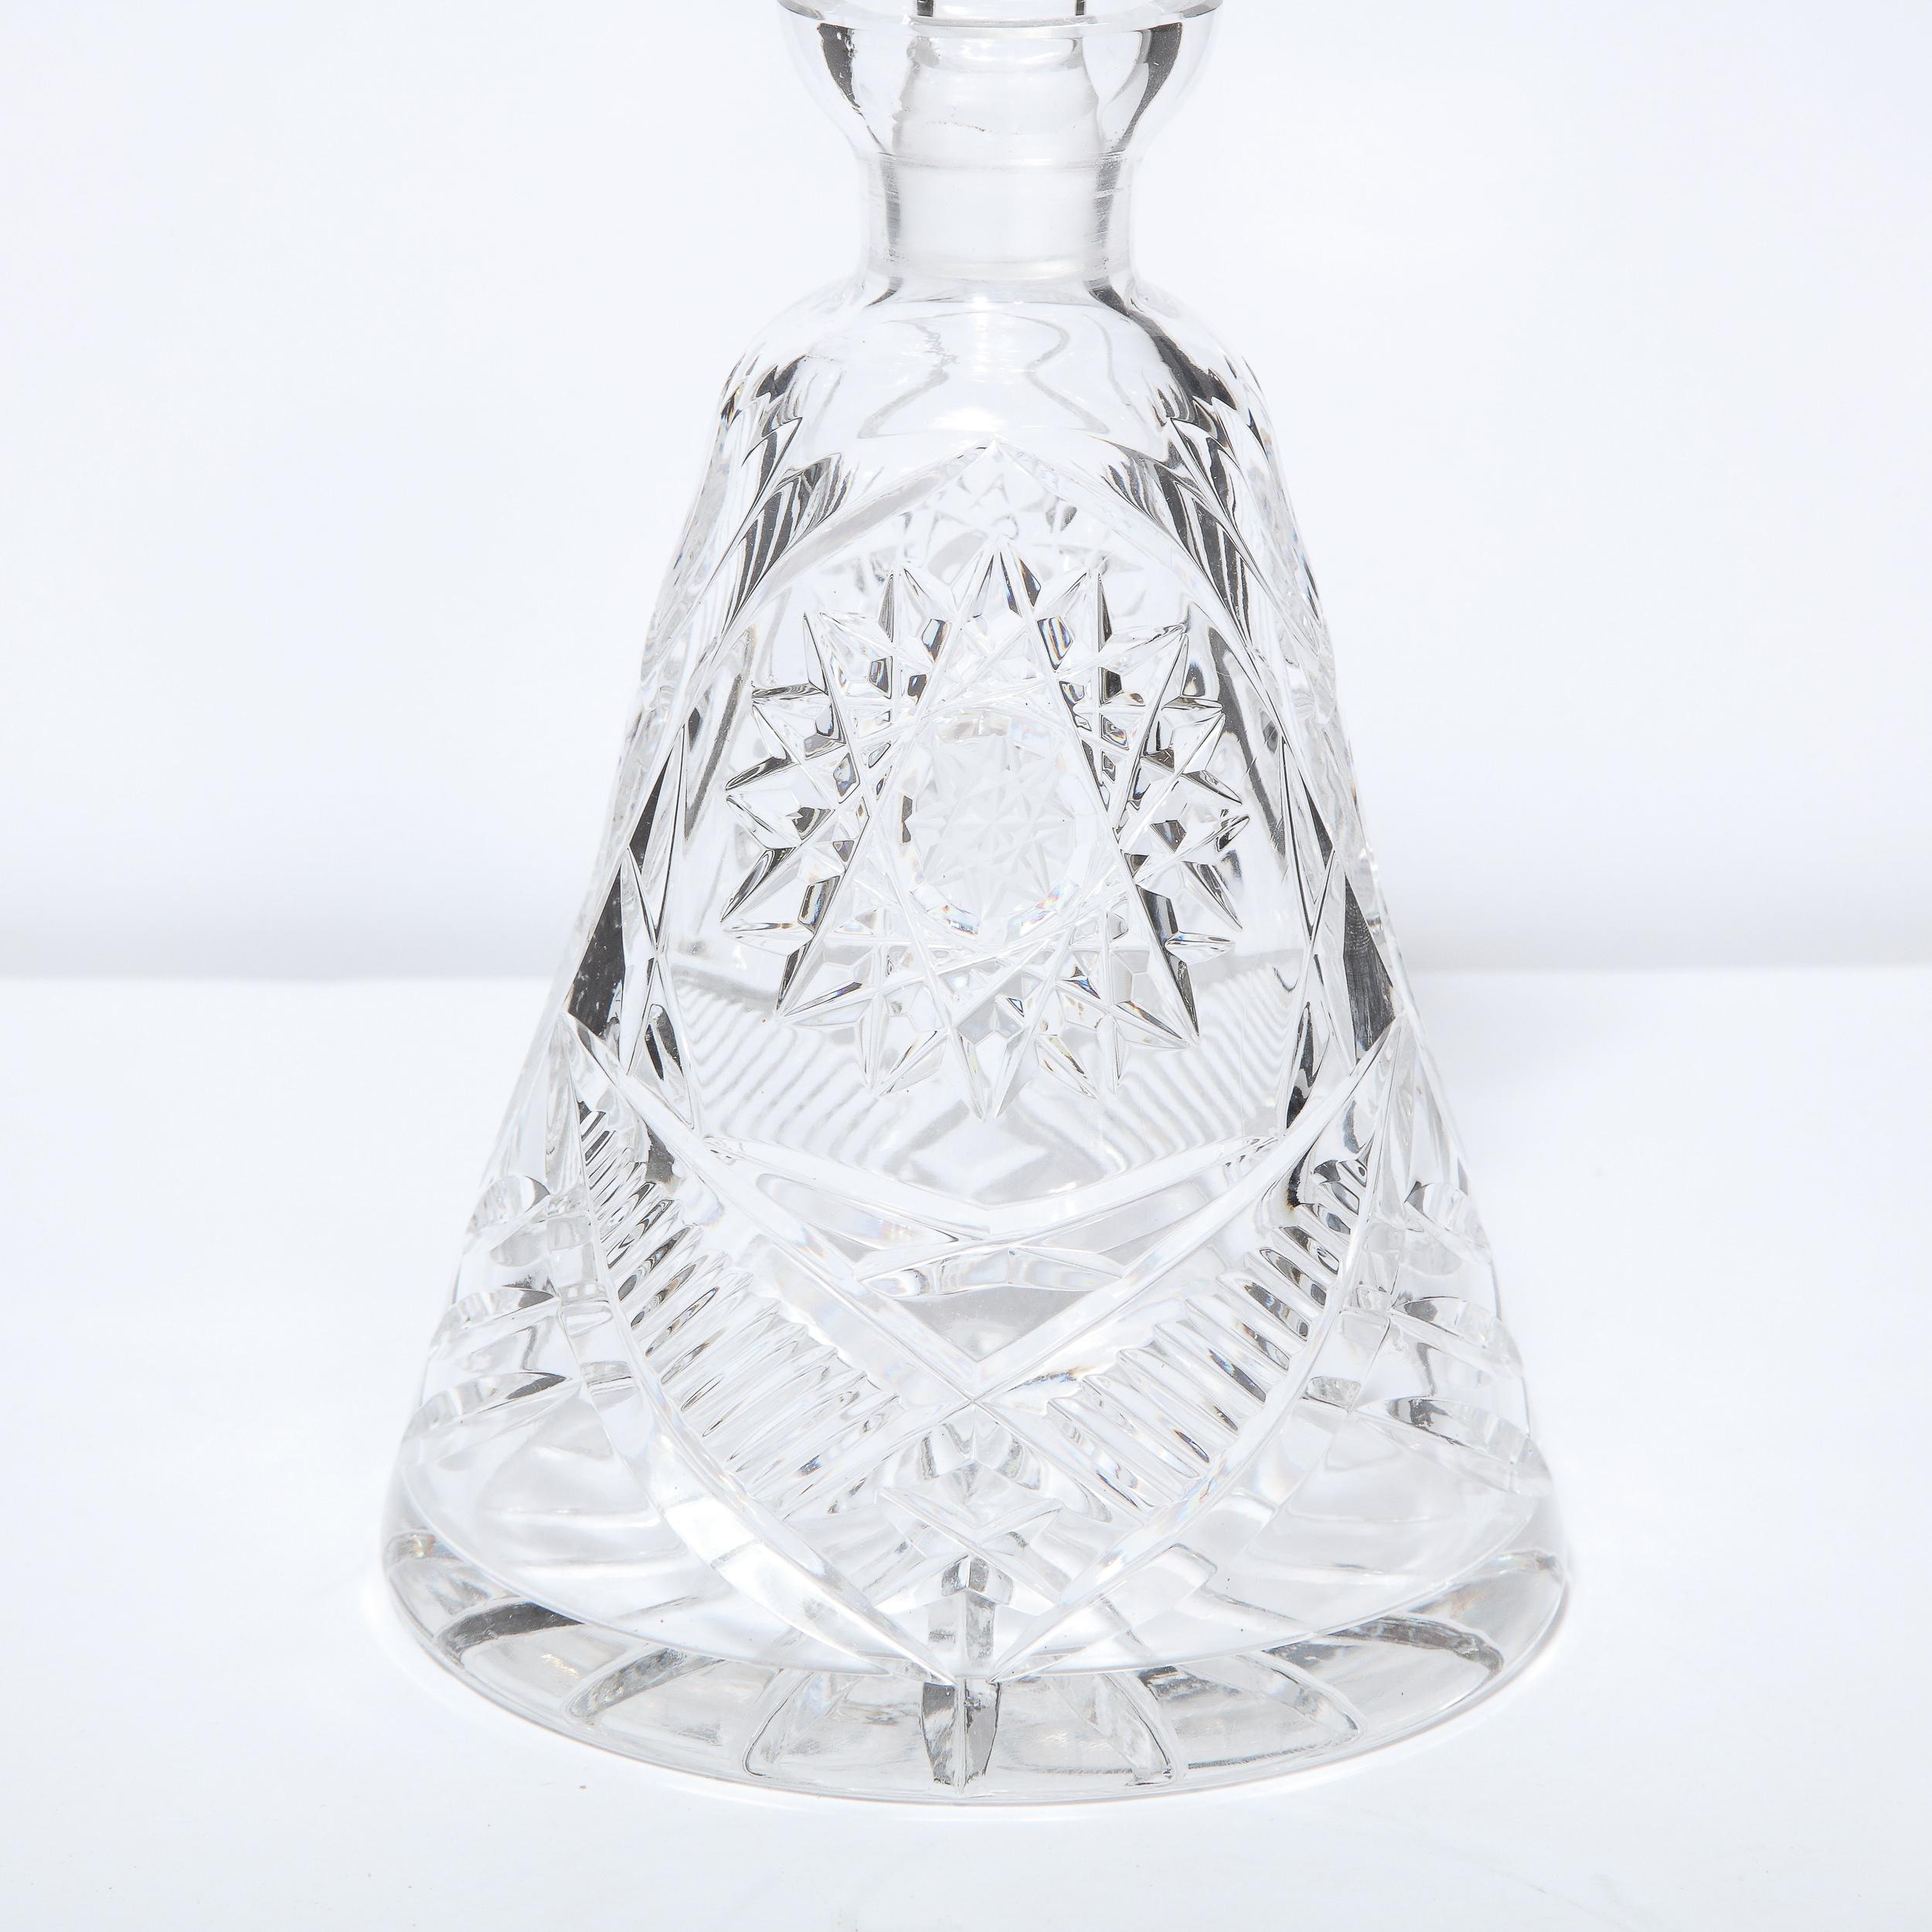 American Mid-Century Modern Translucent Etched Crystal Decanter with Geometric Patterns